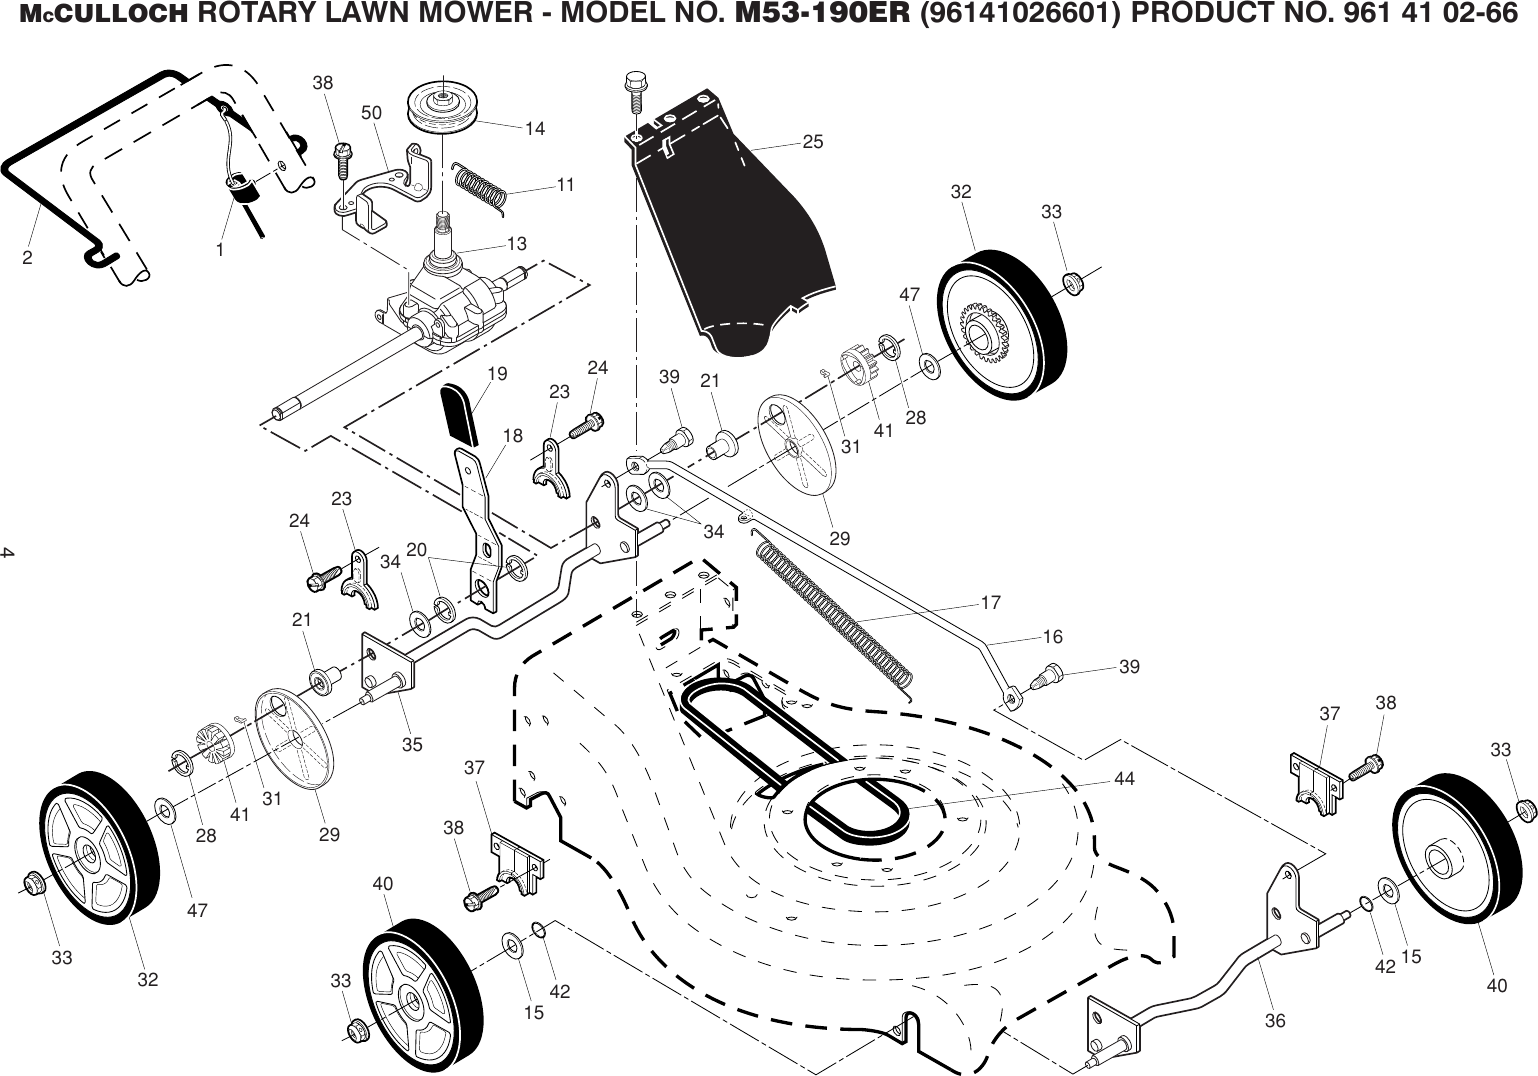 Page 4 of 5 - McCulloch M53-190ER IPL, McCulloch, M53-190ER, 96141026601, 2013-11, Lawn Mower User Manual  To The C3afb110-ea06-4cc6-a114-f3e718baa029